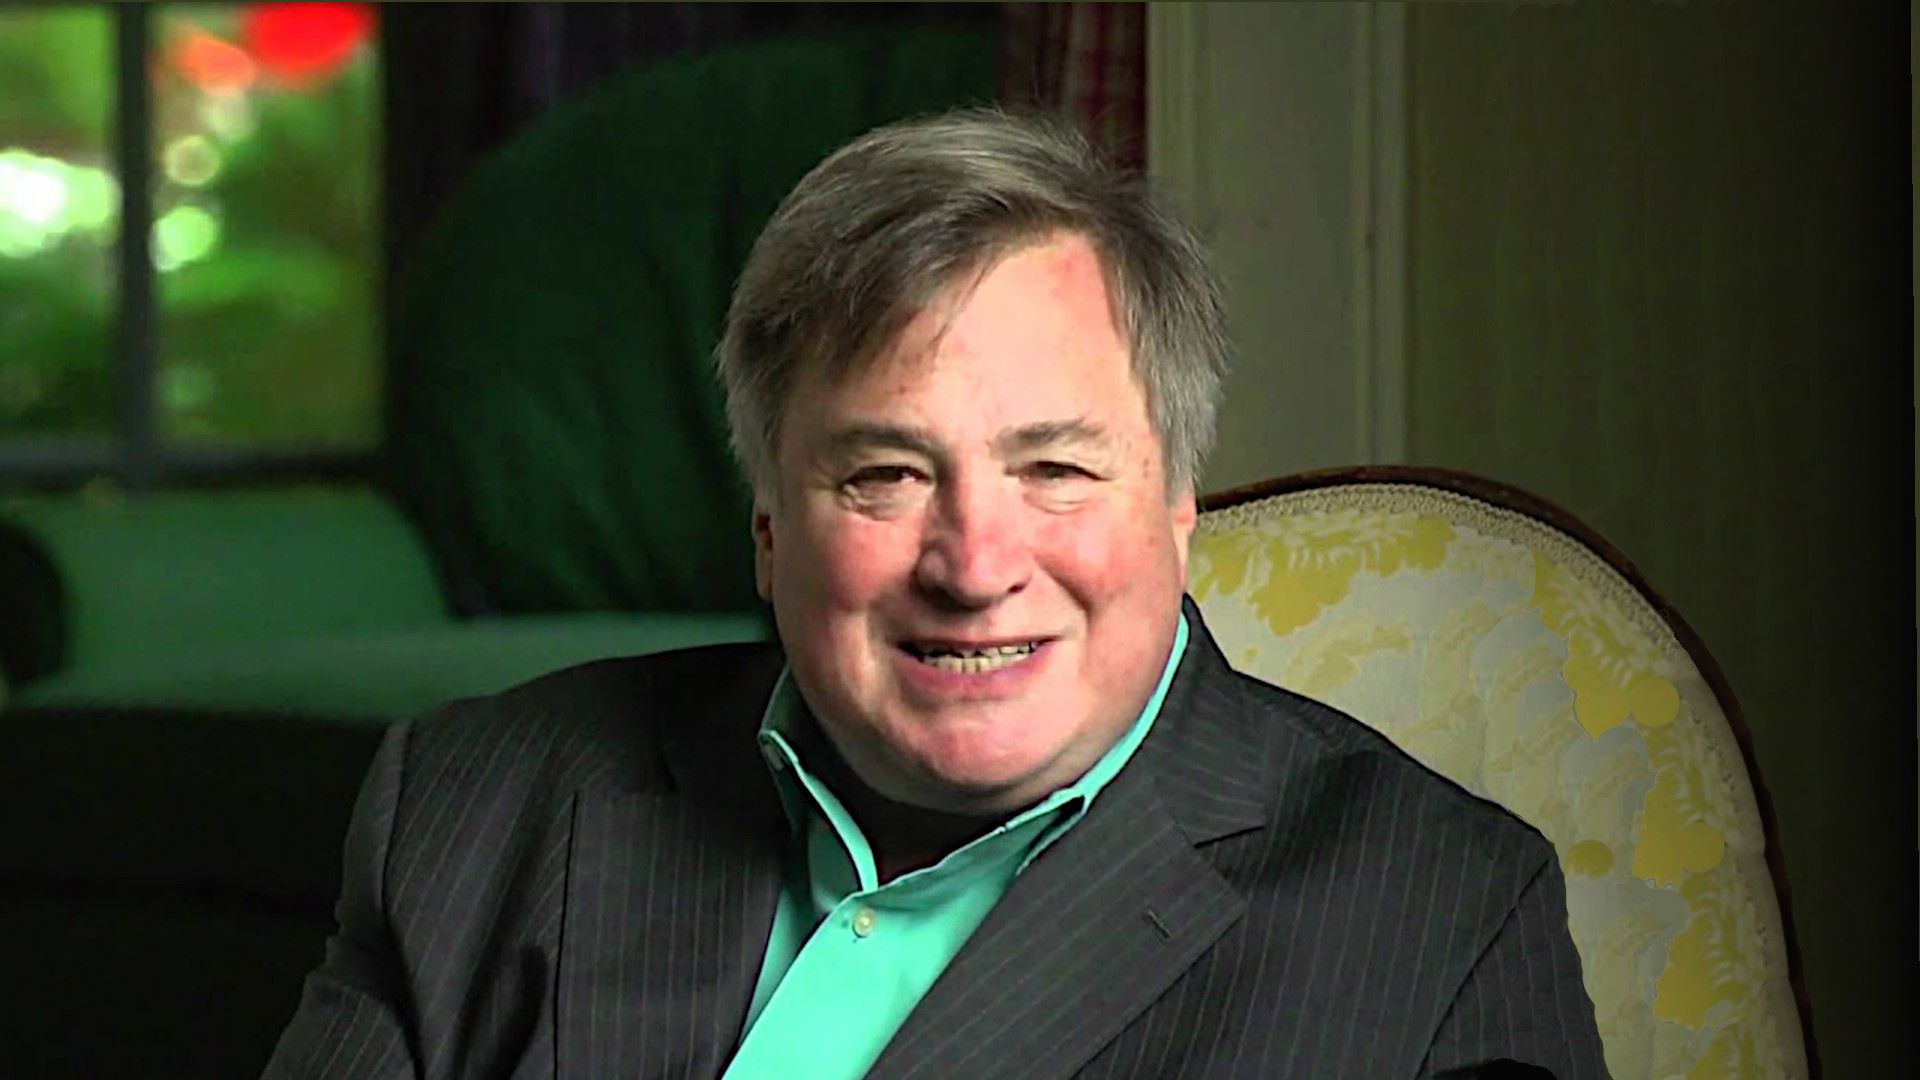 Dick Morris’ Interview Photobombed By Wife’s Caretaker In Underwear